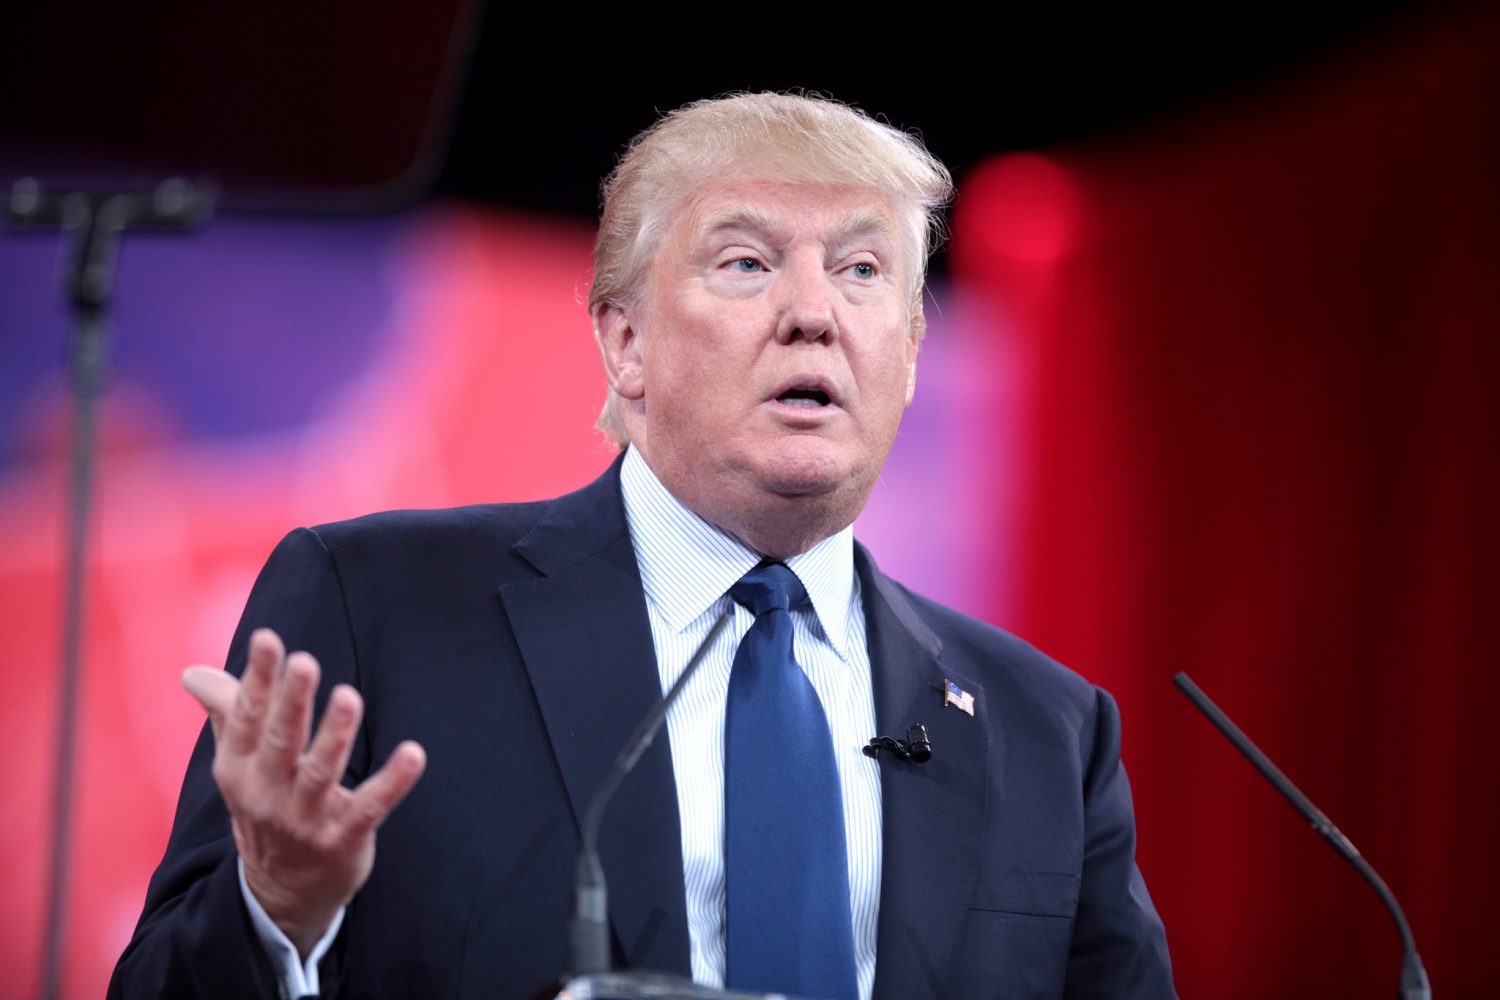 Donald Trump speaking at the 2015 Conservative Political Action Conference (CPAC) in National Harbor, Maryland.